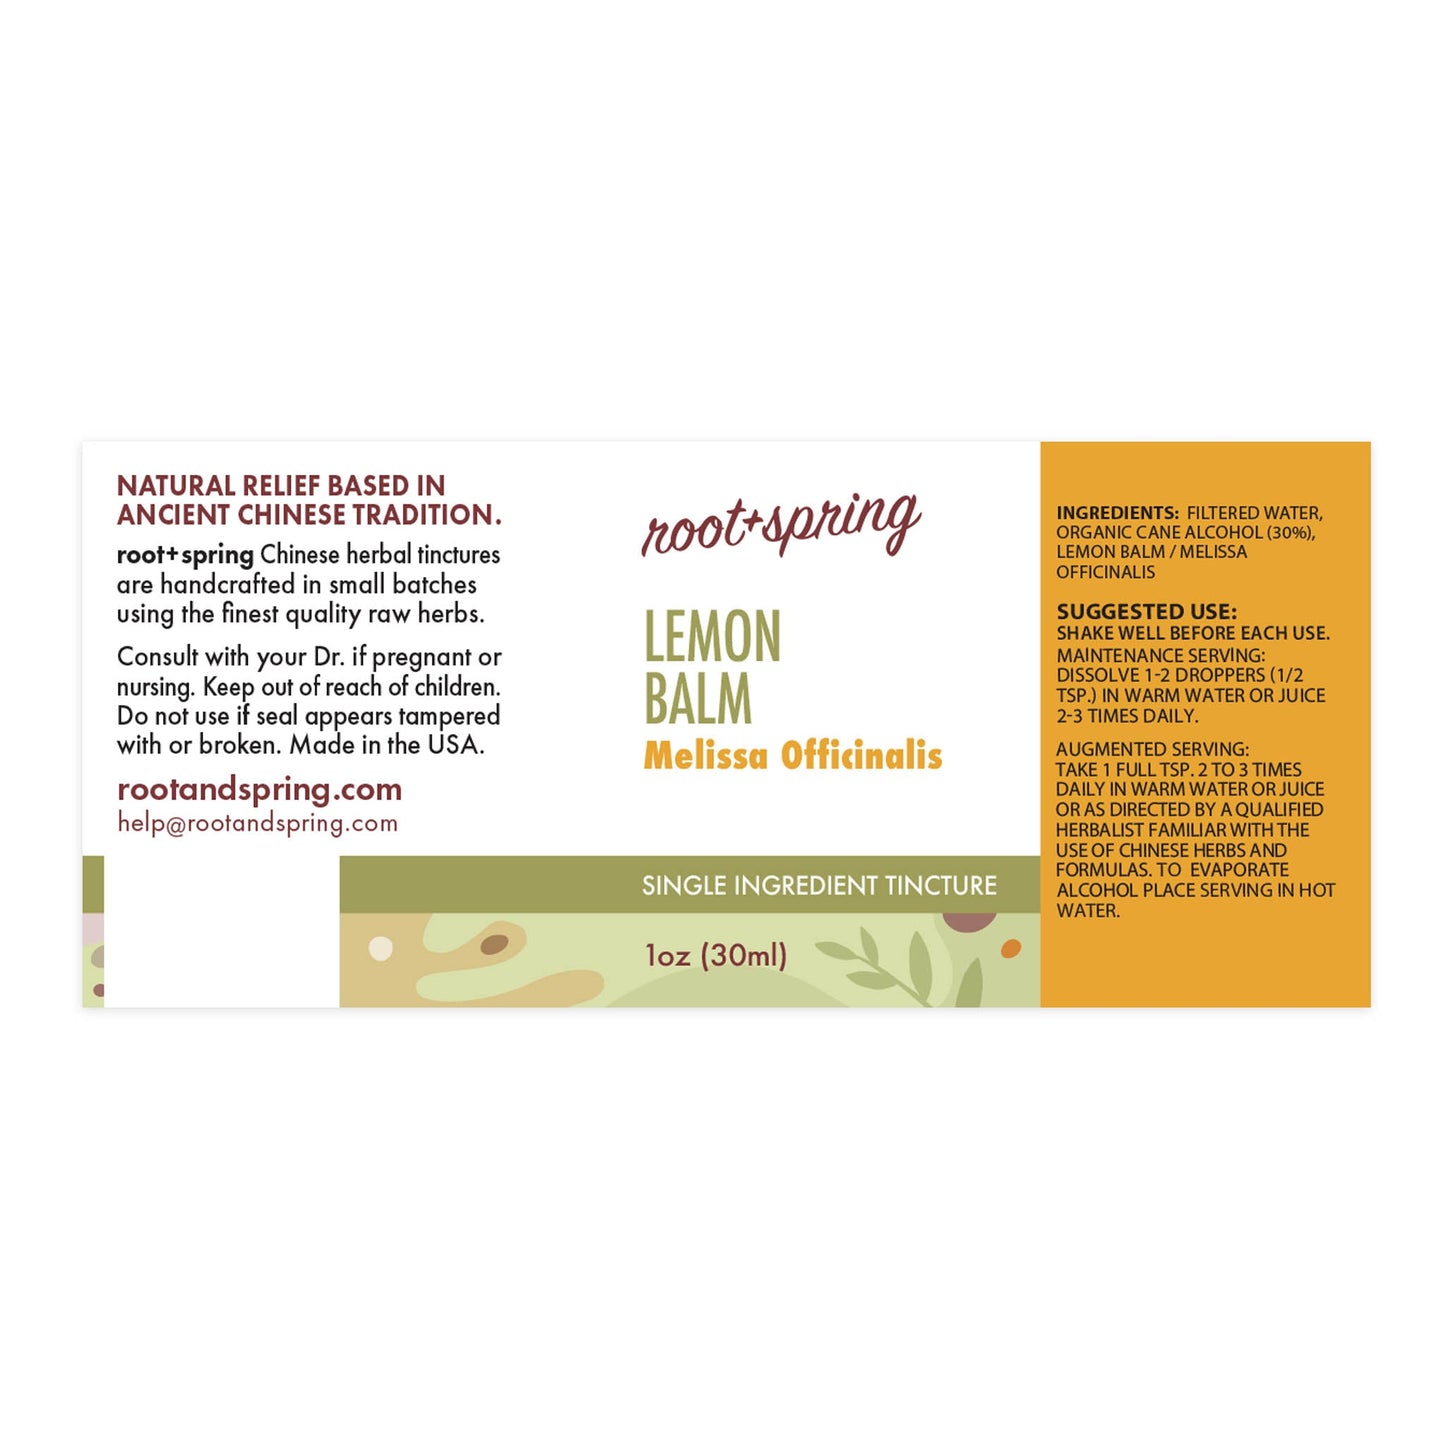 Label of Lemon Balm (Melissa Officinalis) - Herbal Tincture by root + spring